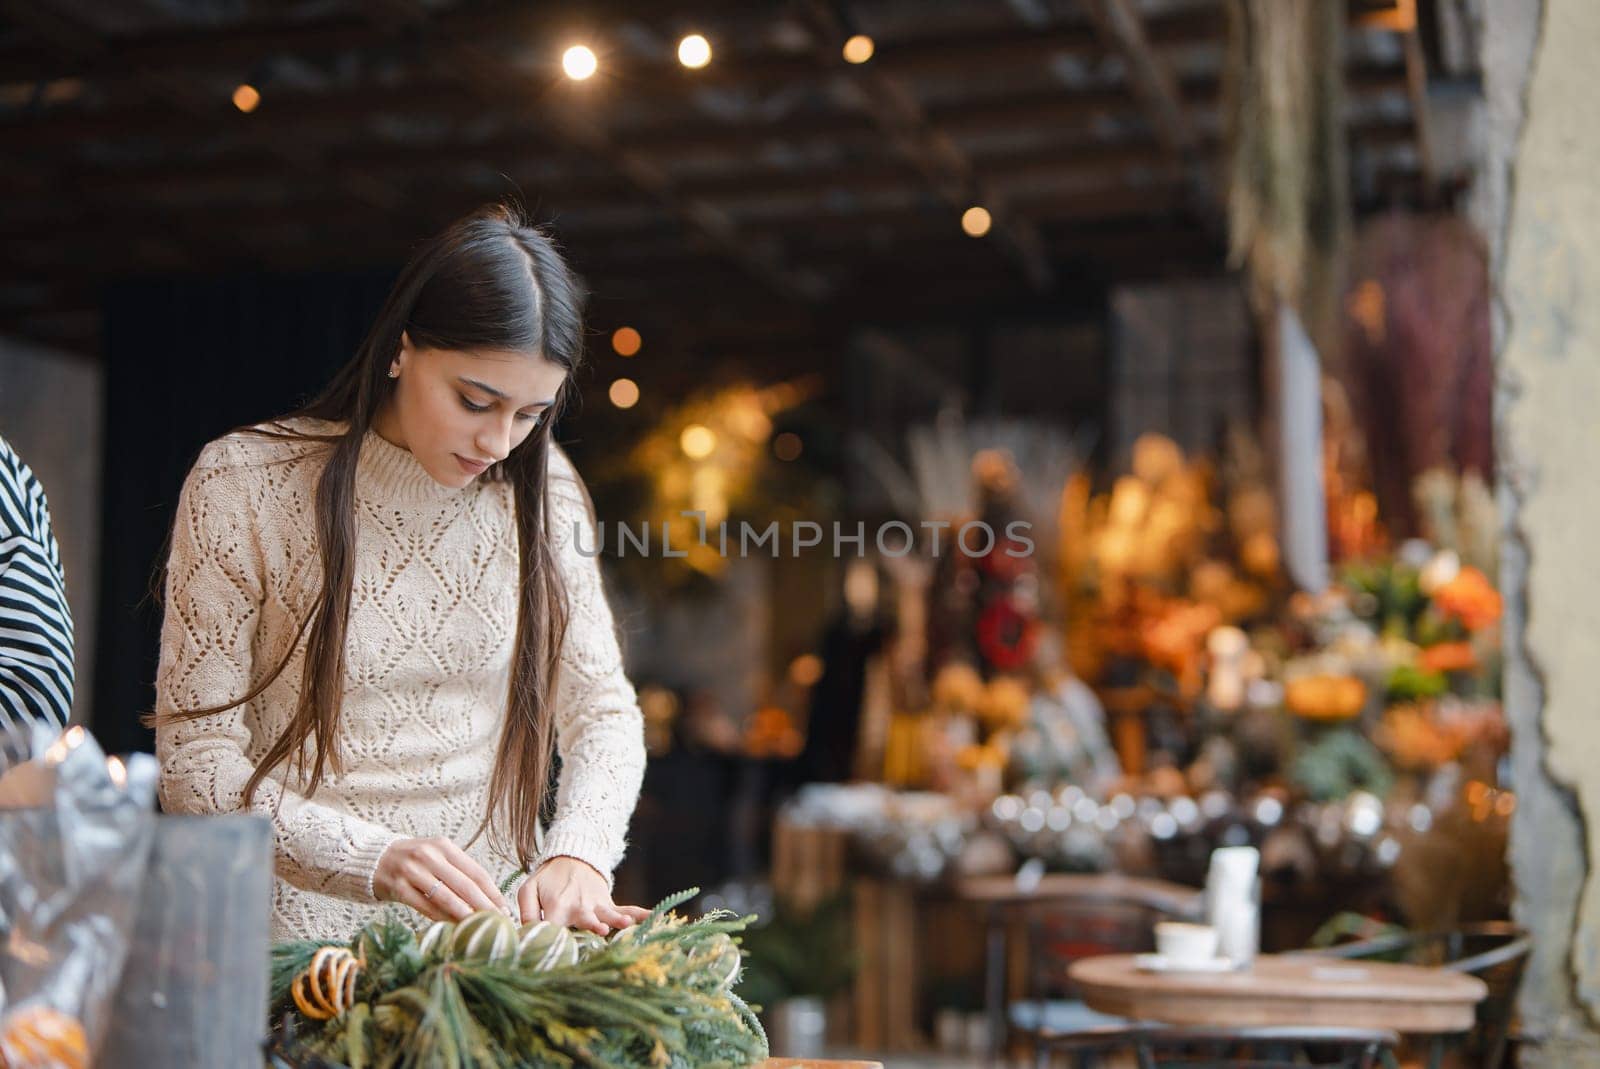 Finishing touches on the Christmas wreath displayed at the flower shop counter. by teksomolika